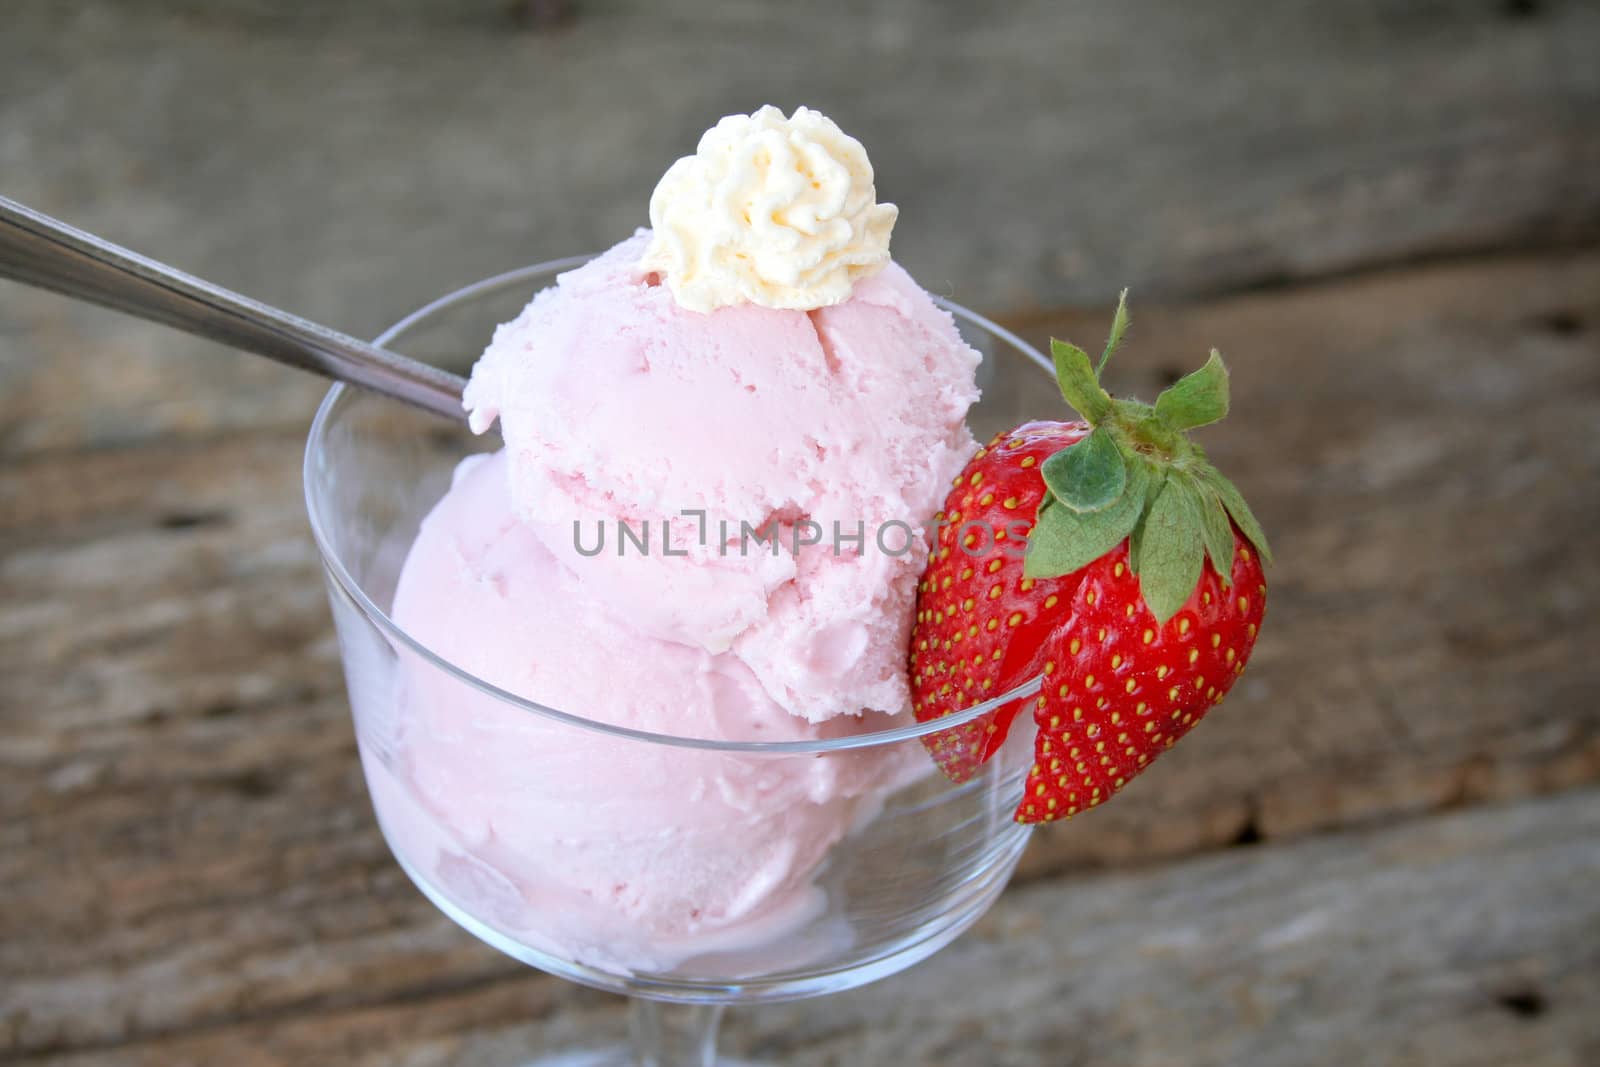 Dish of strawberry ice-cream with a fresh strawberry on the side and topped off with whip cream.